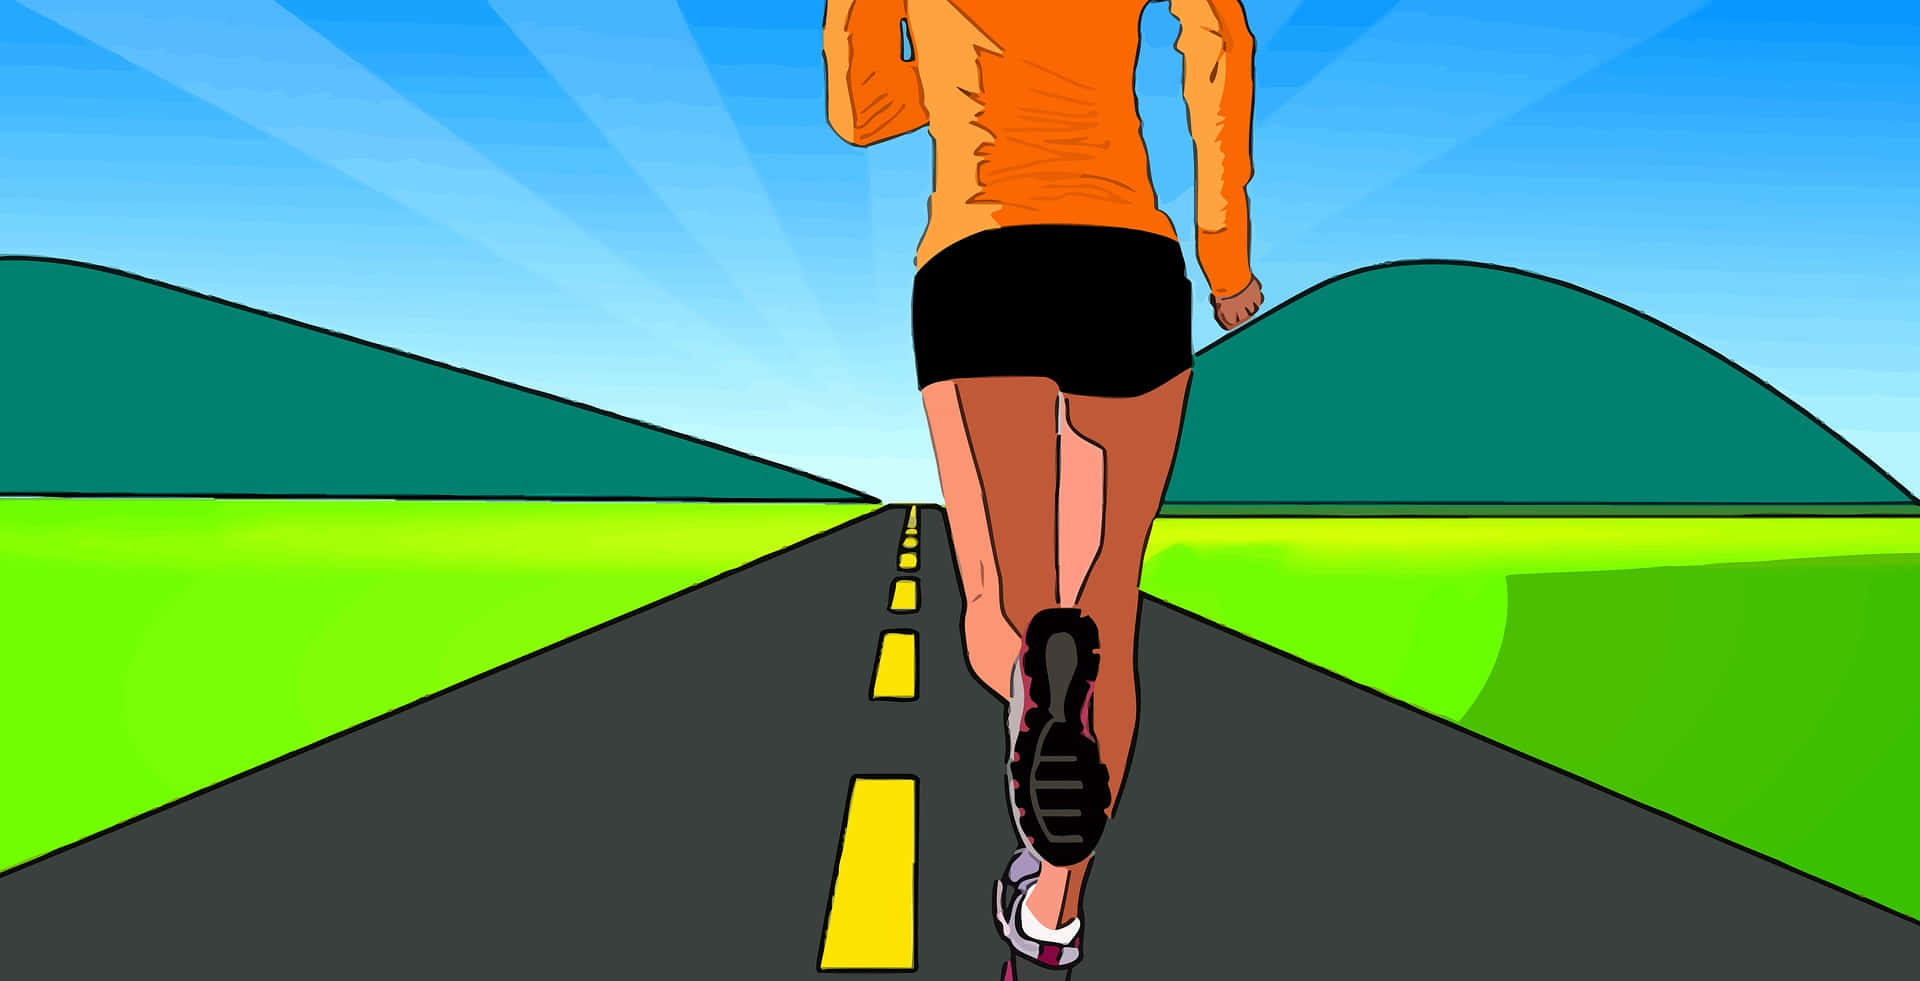 Cartoon Jogging Workout On Road Picture